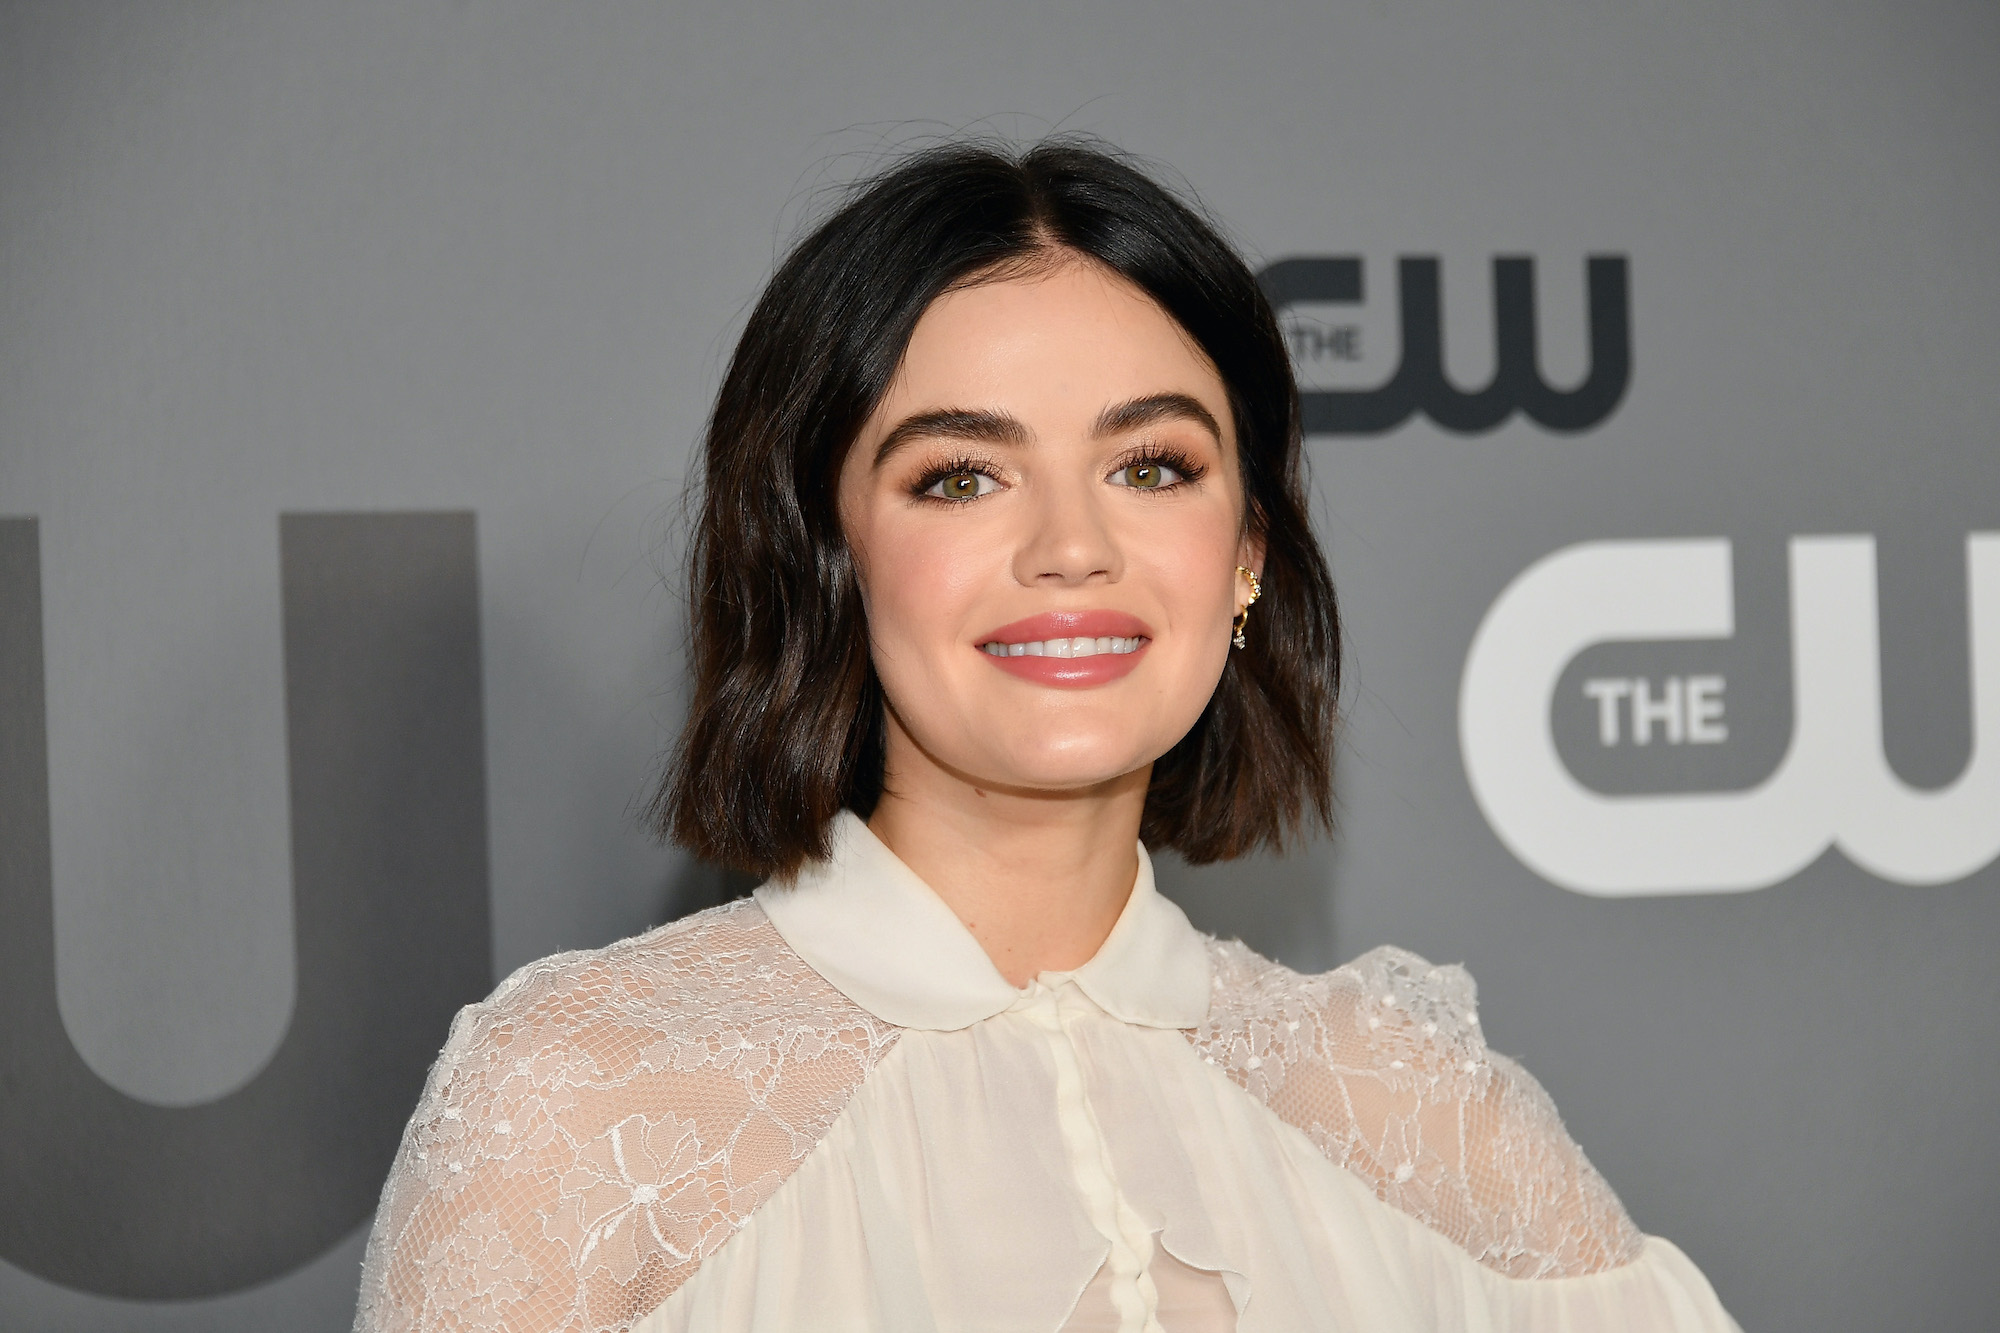 Lucy Hale is seen on February 14, 2023 in Los Angeles, California